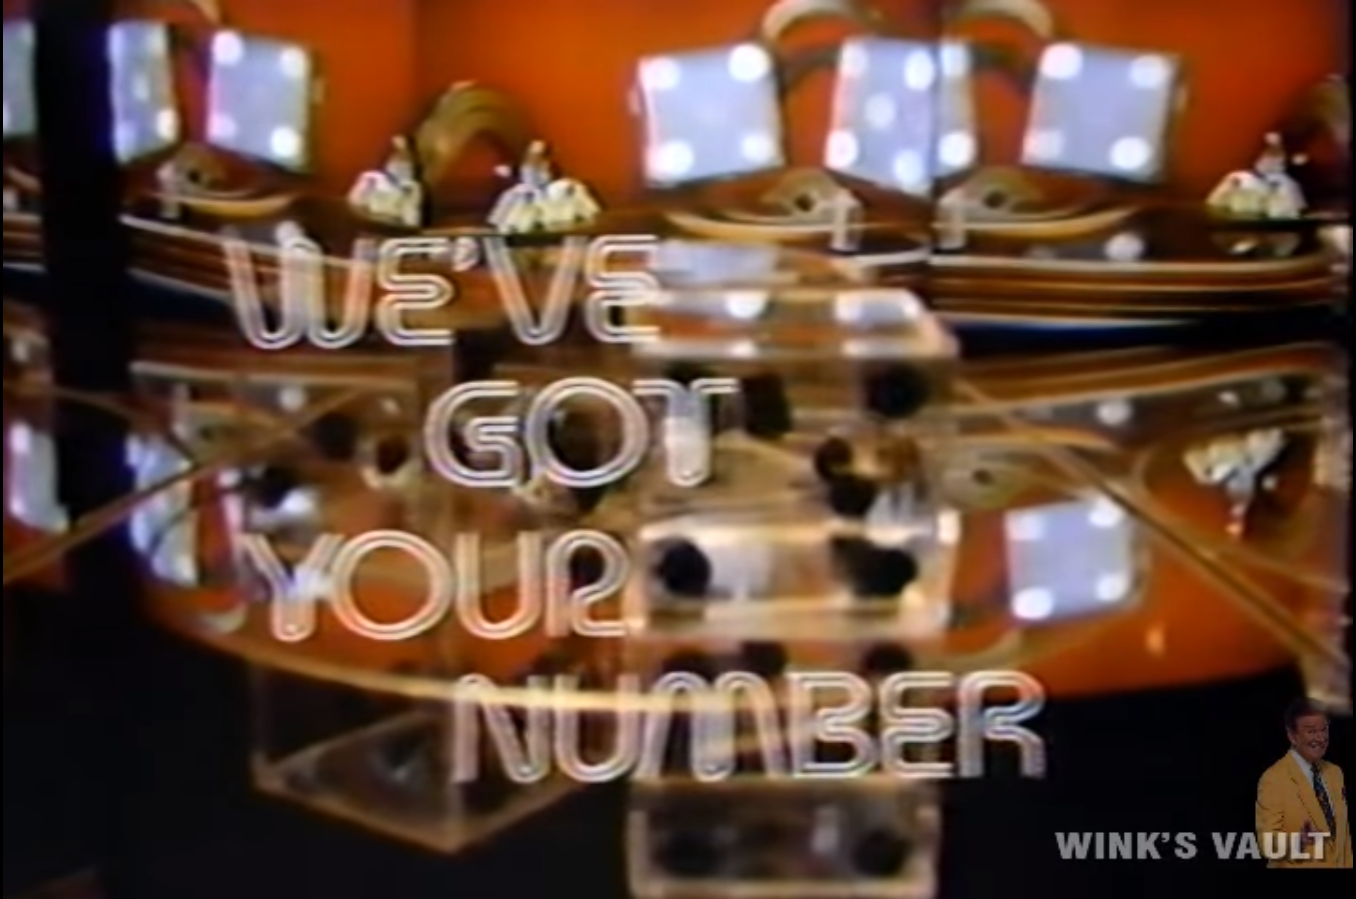 https://static.wikia.nocookie.net/gameshows/images/9/95/Vlcsnap-204935.png